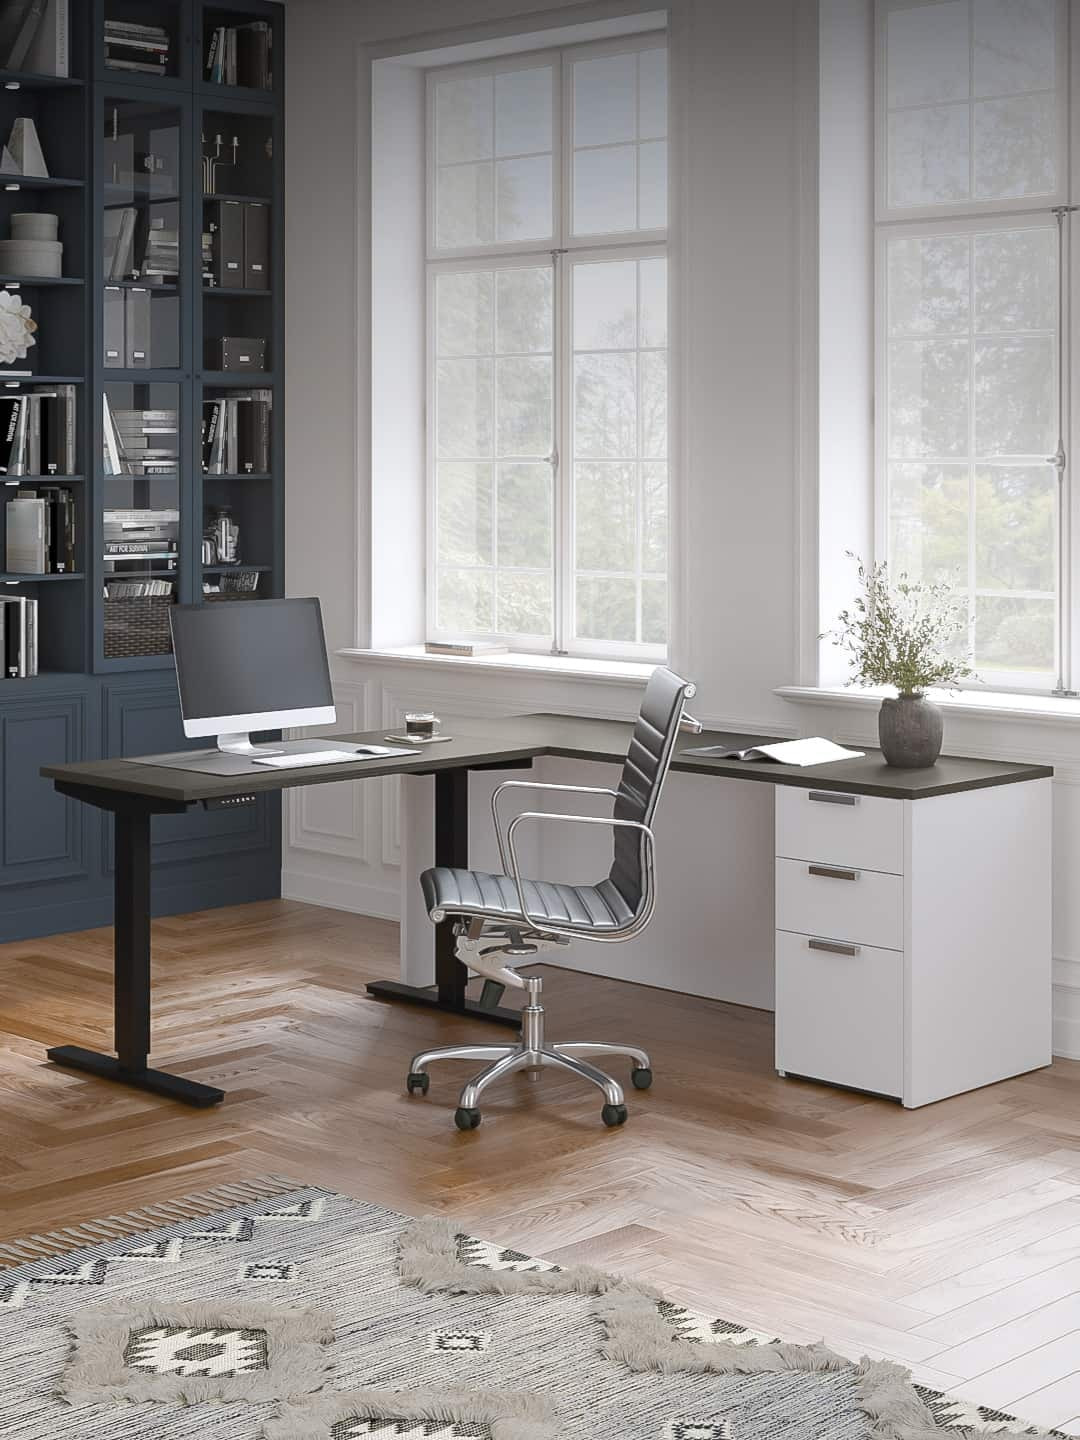 Bestar USA : Modern Home and Office Furniture You Can Afford!